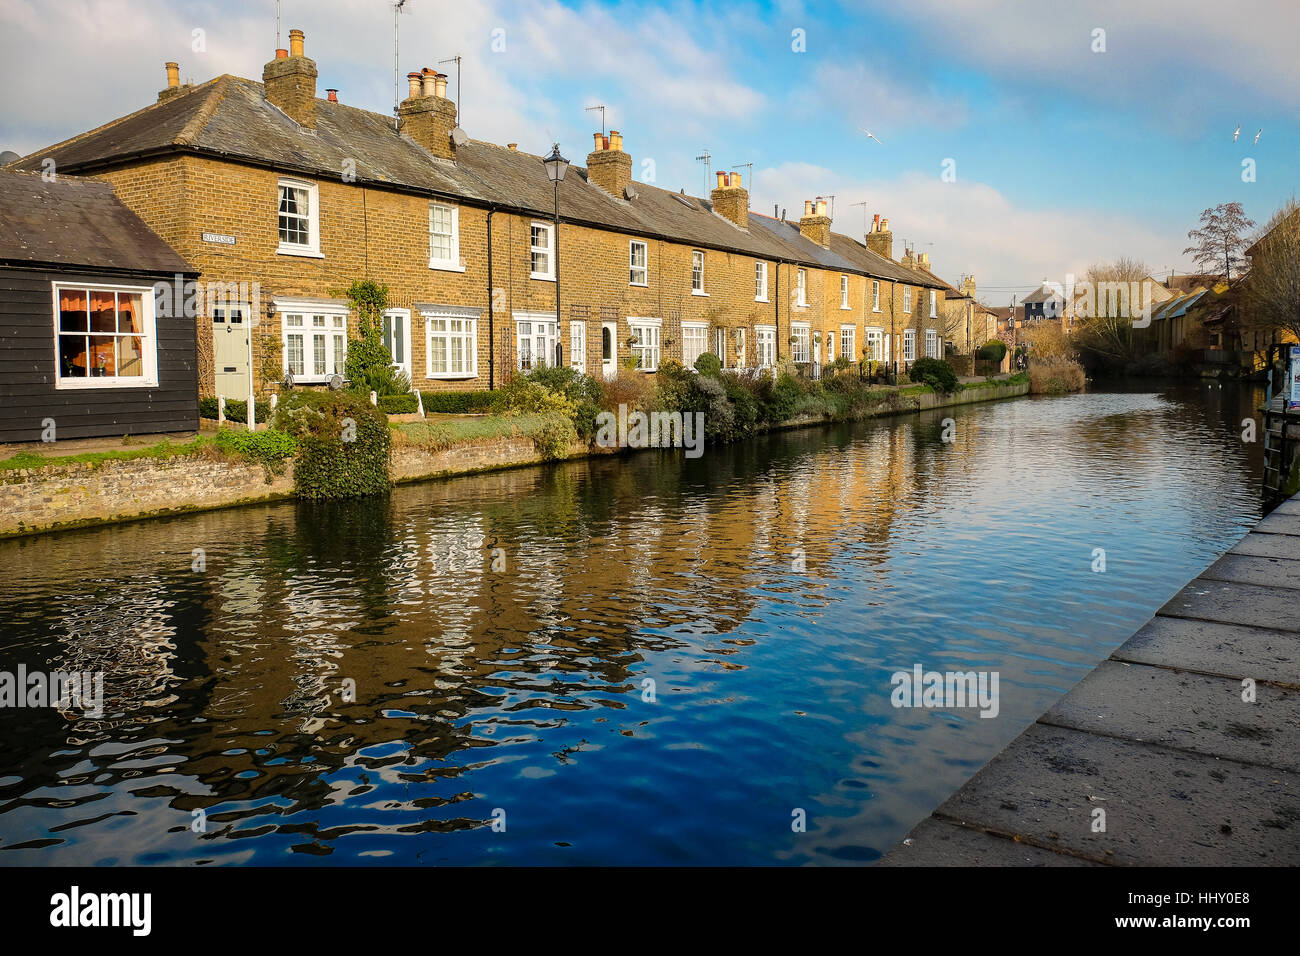 A row of canal side cottages in Hertford, England Stock Photo